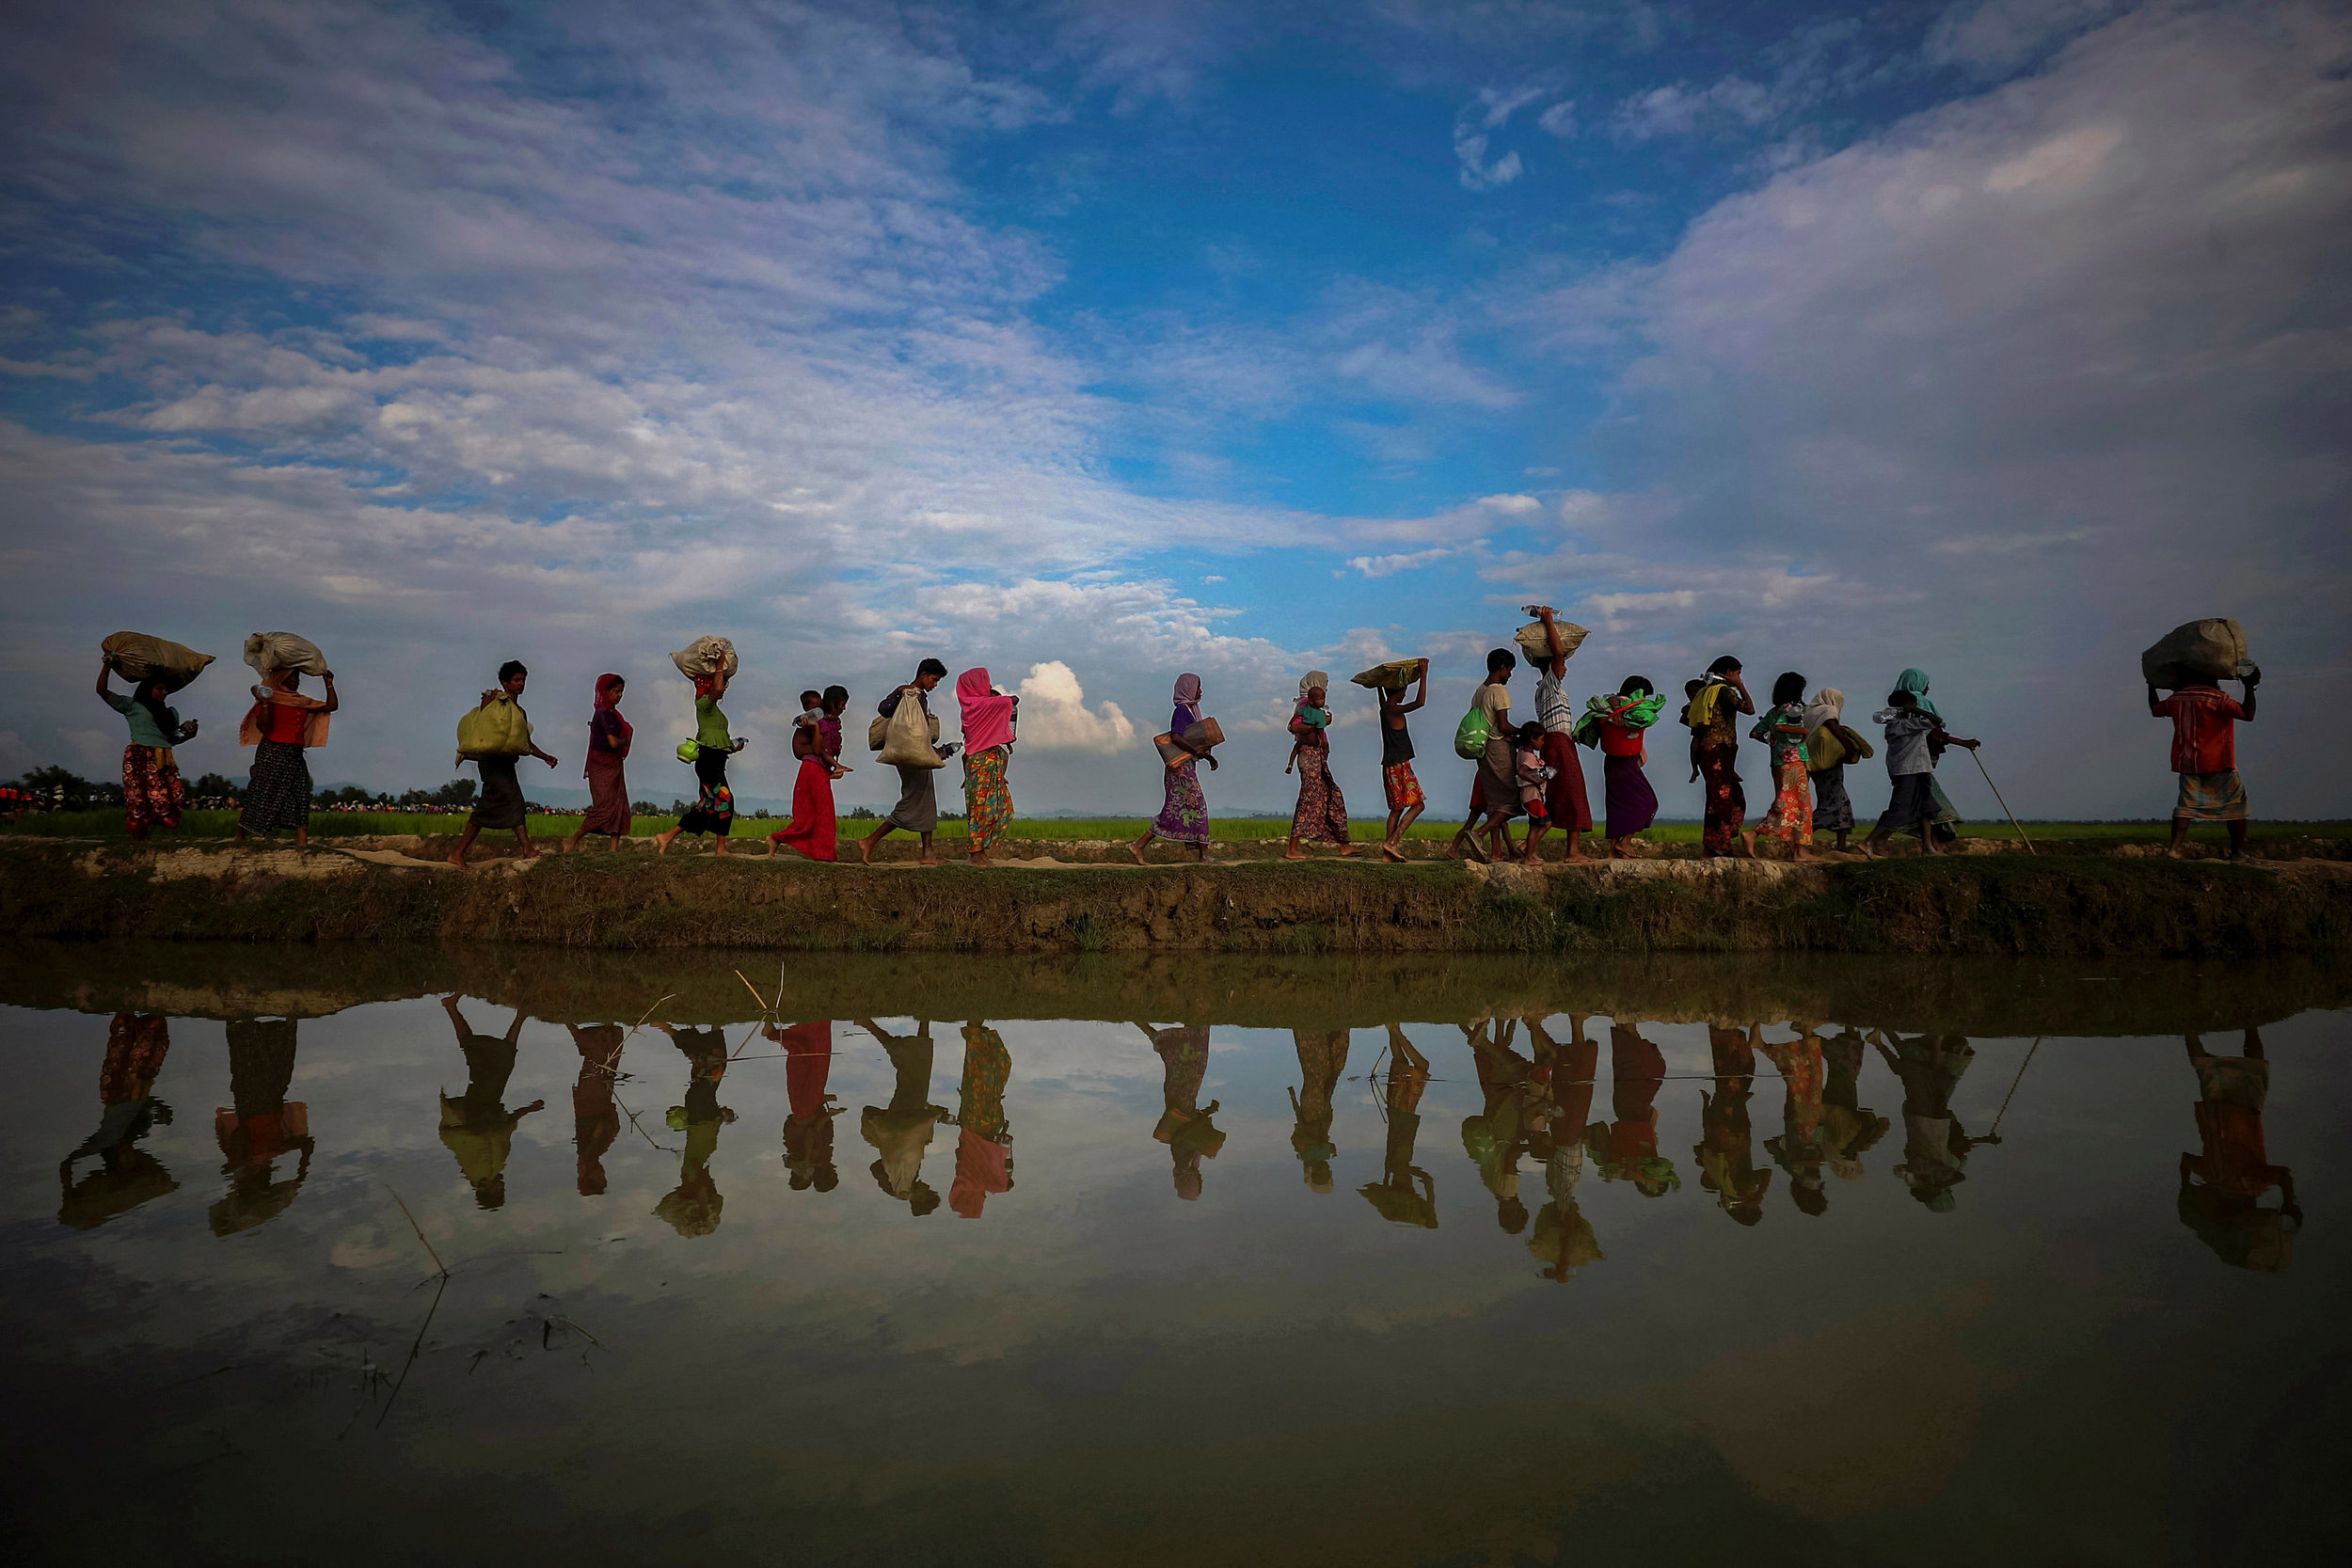  Rohingya refugees are reflected in rain water along an embankment next to paddy fields after fleeing from Myanmar into Palang Khali, near Cox's Bazar, Bangladesh.
Photo by Hannah McKay, 02 November 2017
 